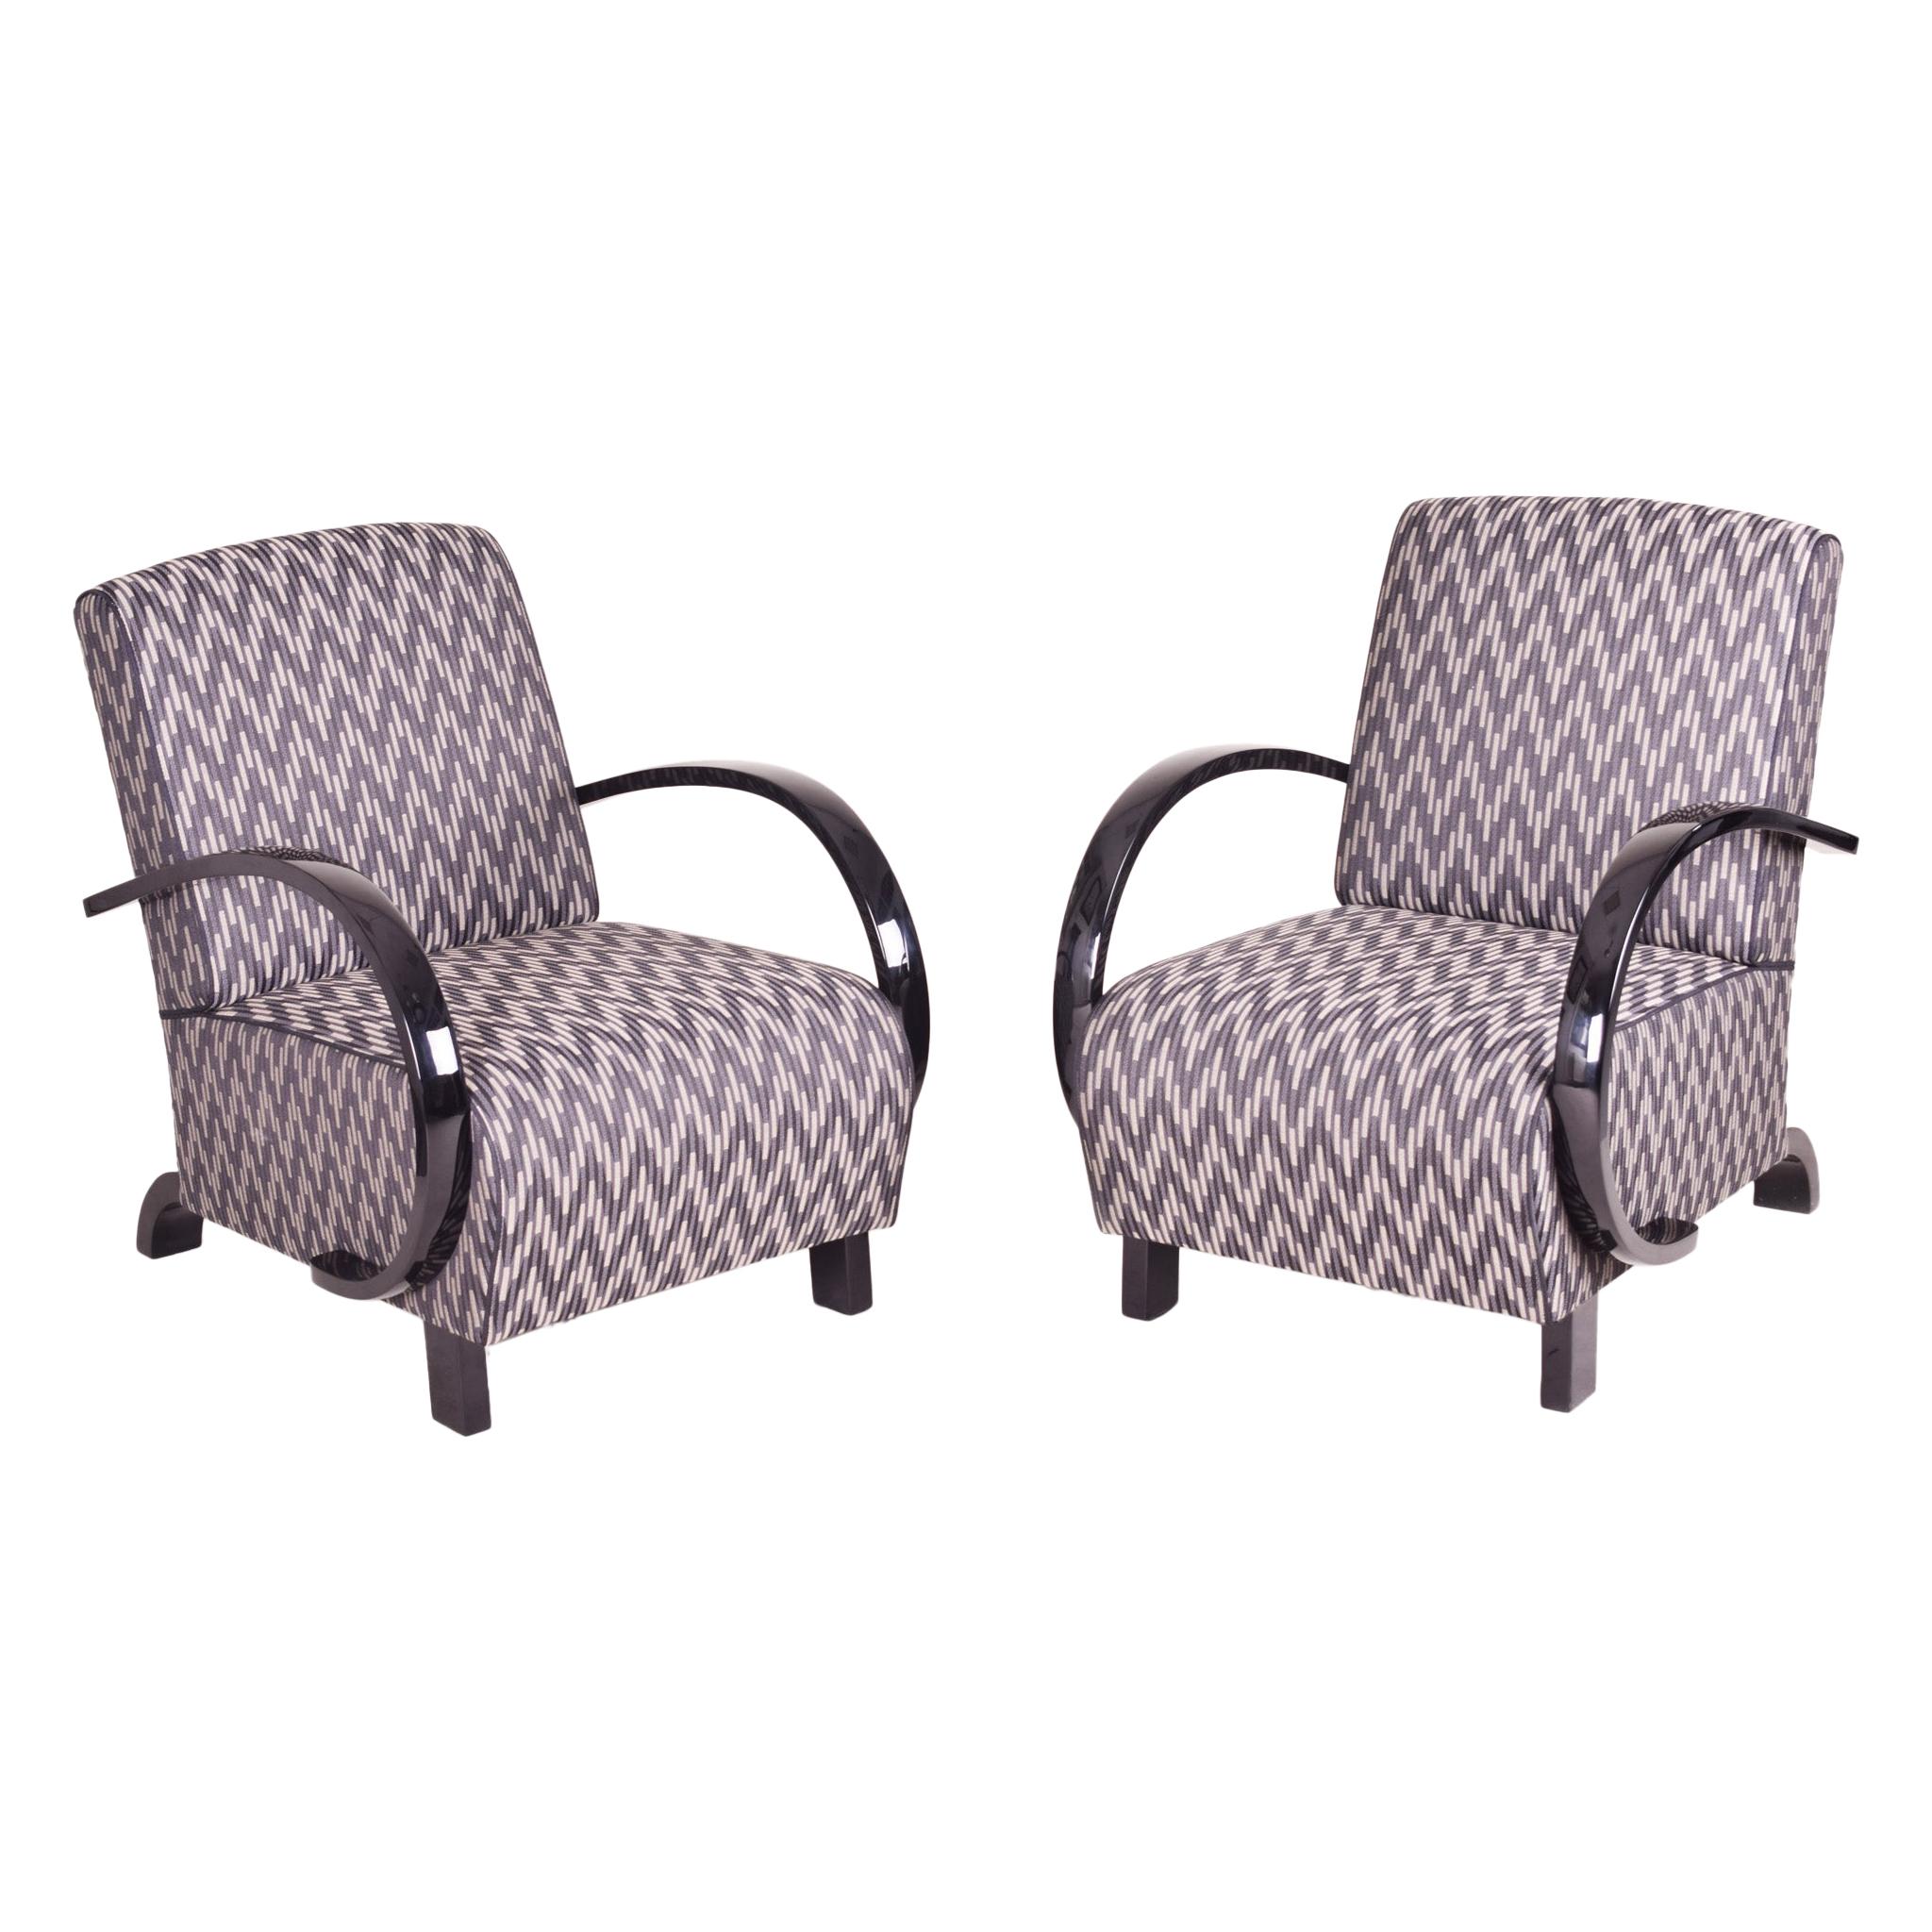 Early 20th Century Pair of Grey Art Deco Beech Armchairs, Black Lacquer, 1930s For Sale